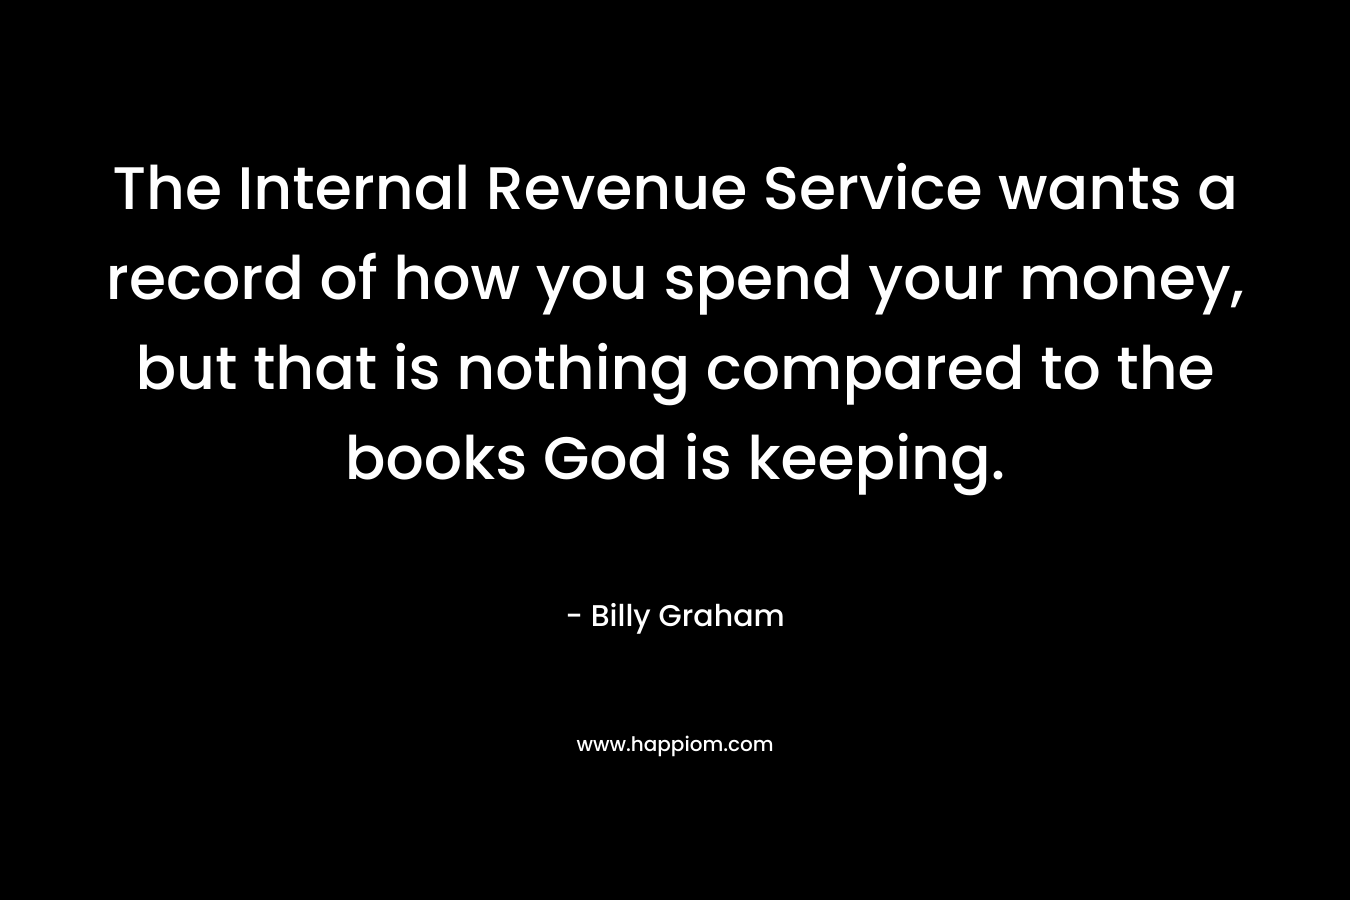 The Internal Revenue Service wants a record of how you spend your money, but that is nothing compared to the books God is keeping.